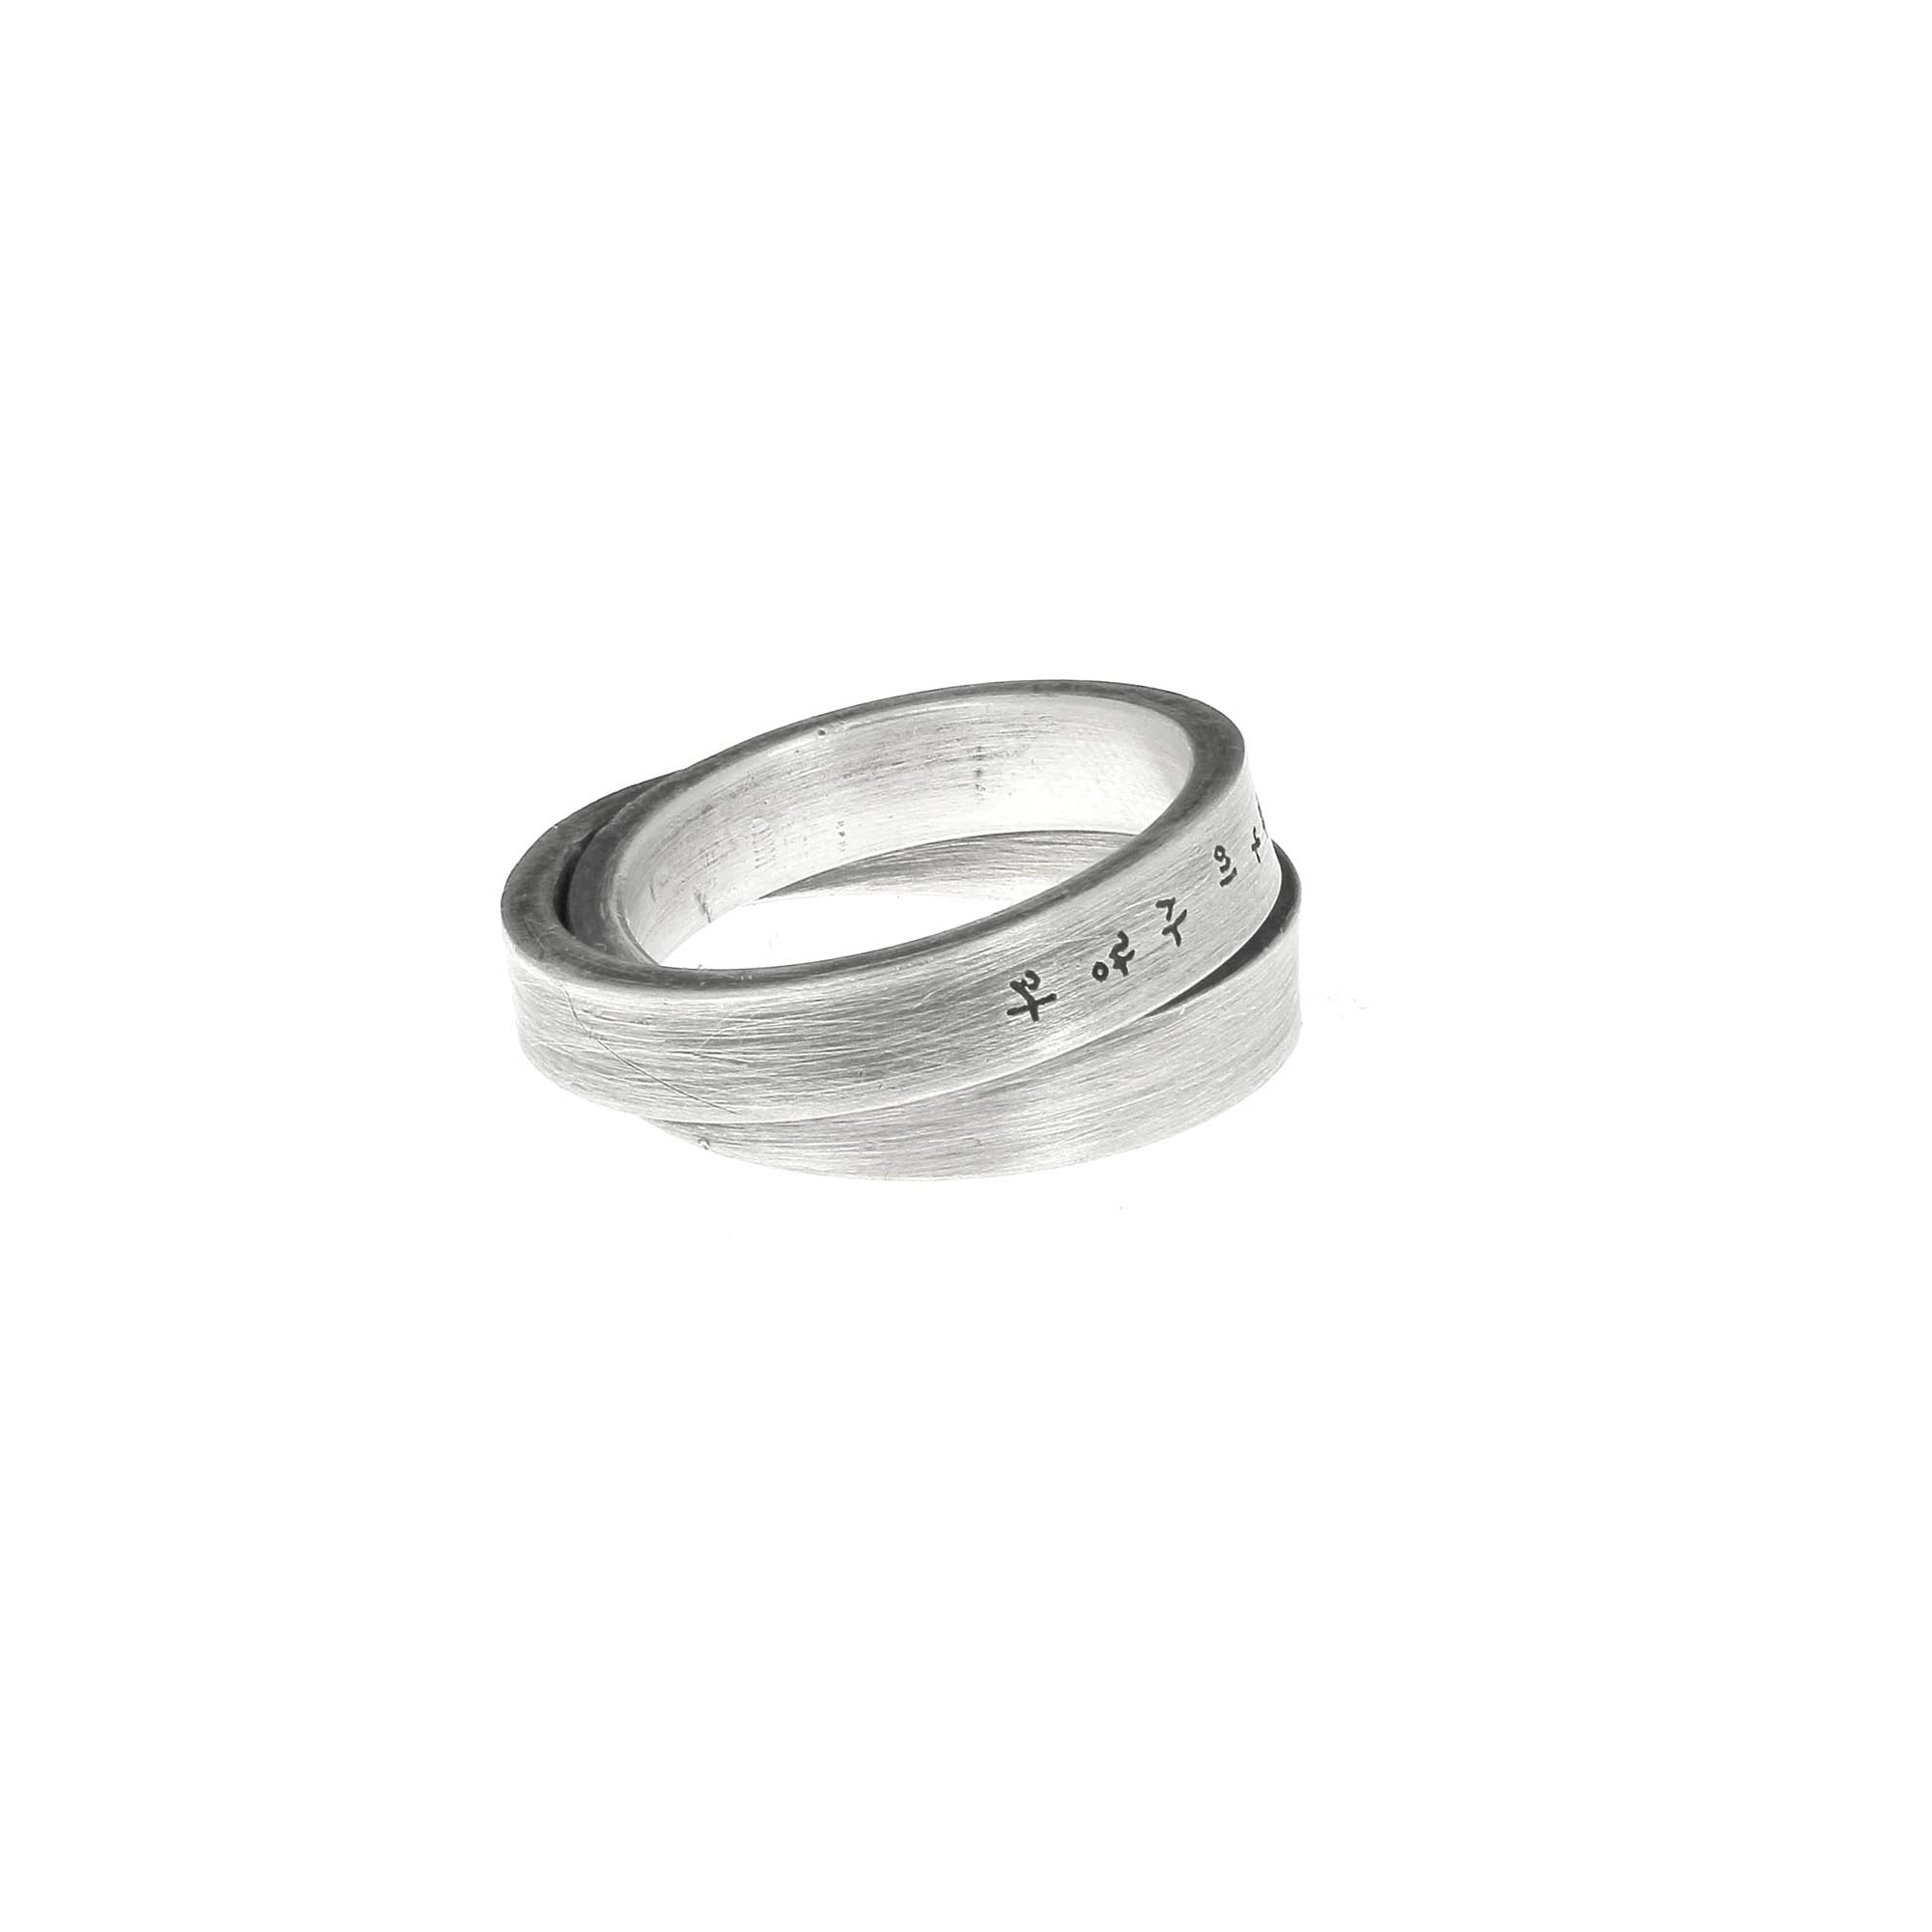 Double Banded Ring with Poem